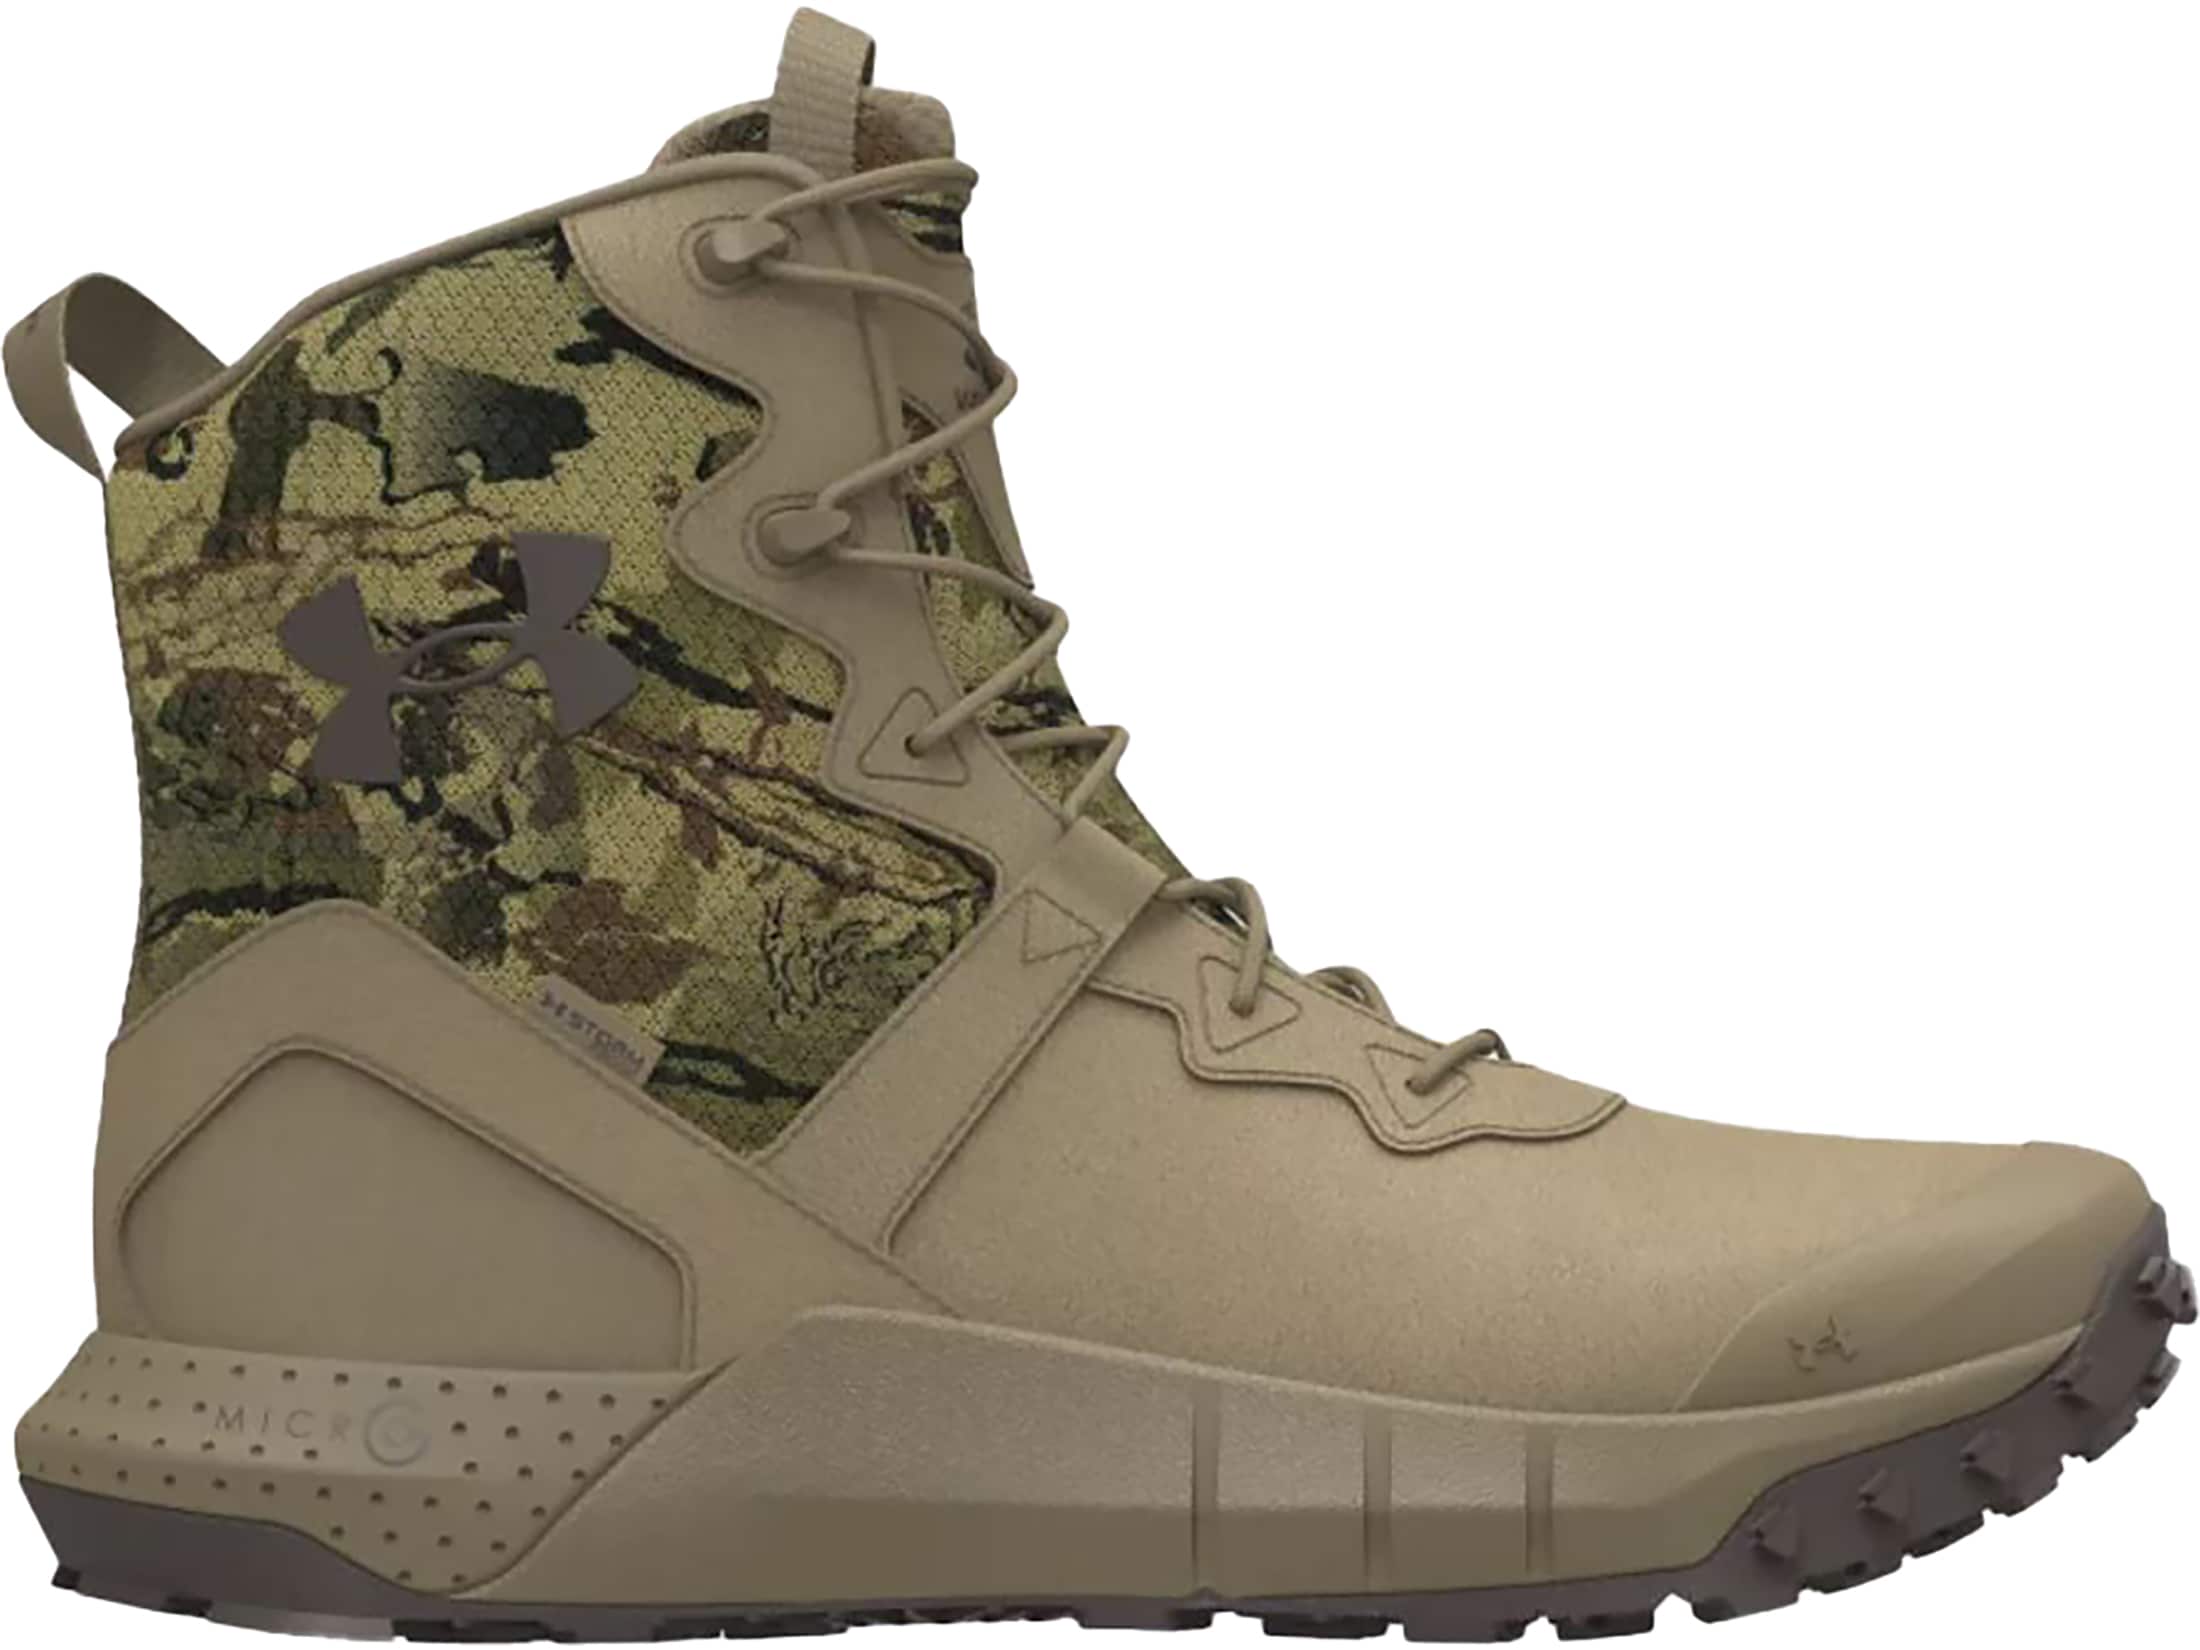 Under Armour Micro G Valsetz Reaper WP Hunting Boots Leather/Synthetic